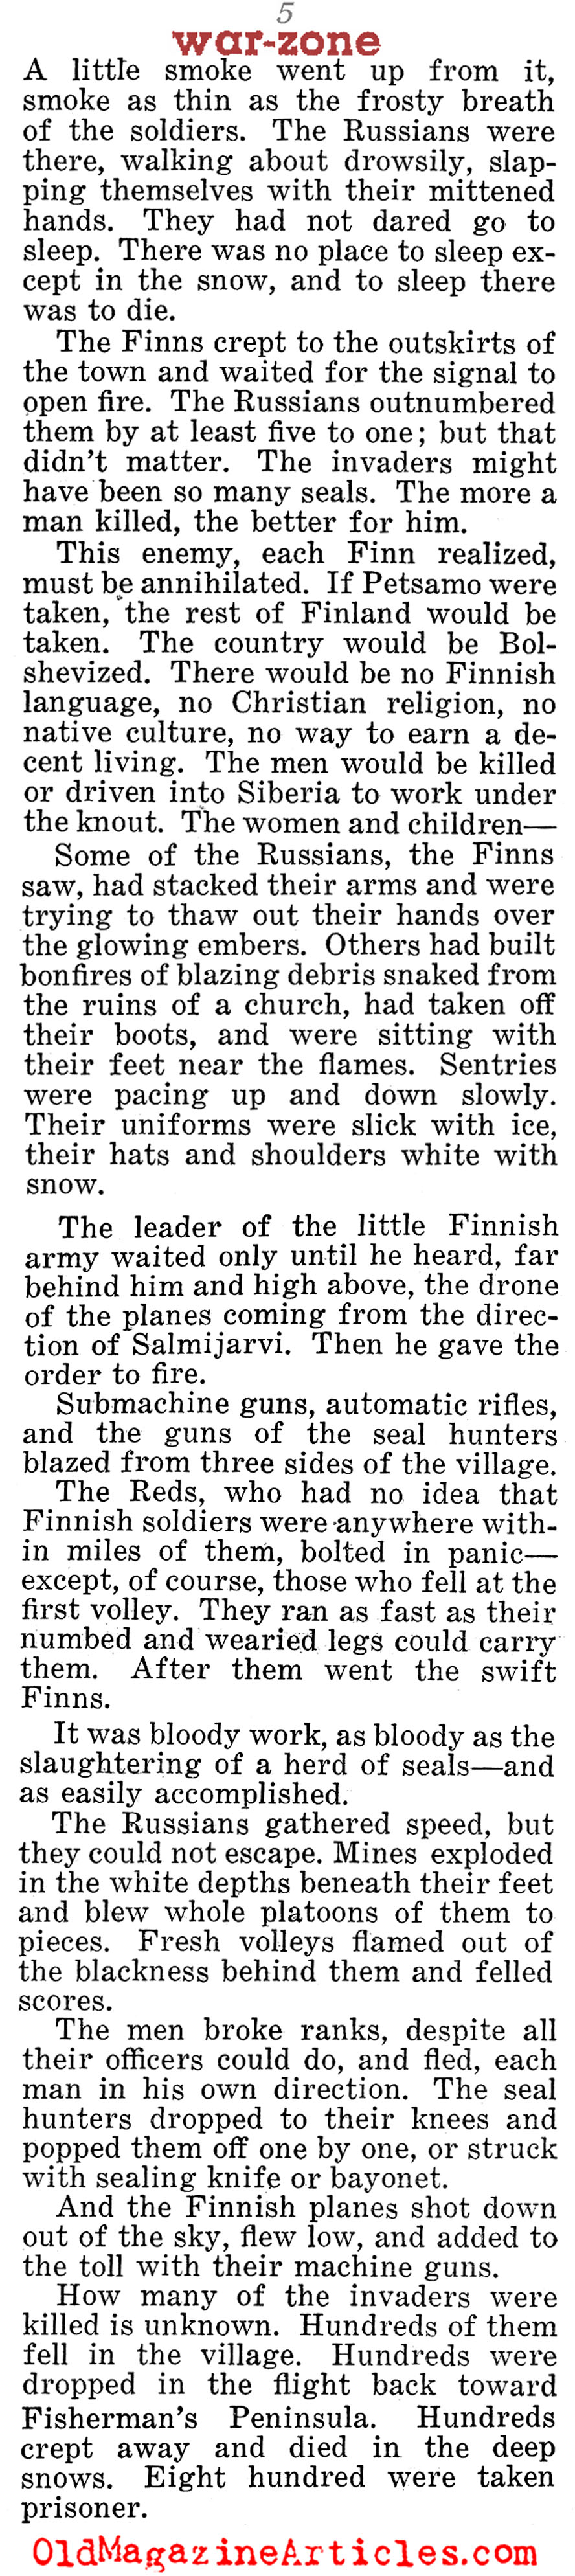 The War in Northern Finland<BR> (Liberty Magazine, 1940)